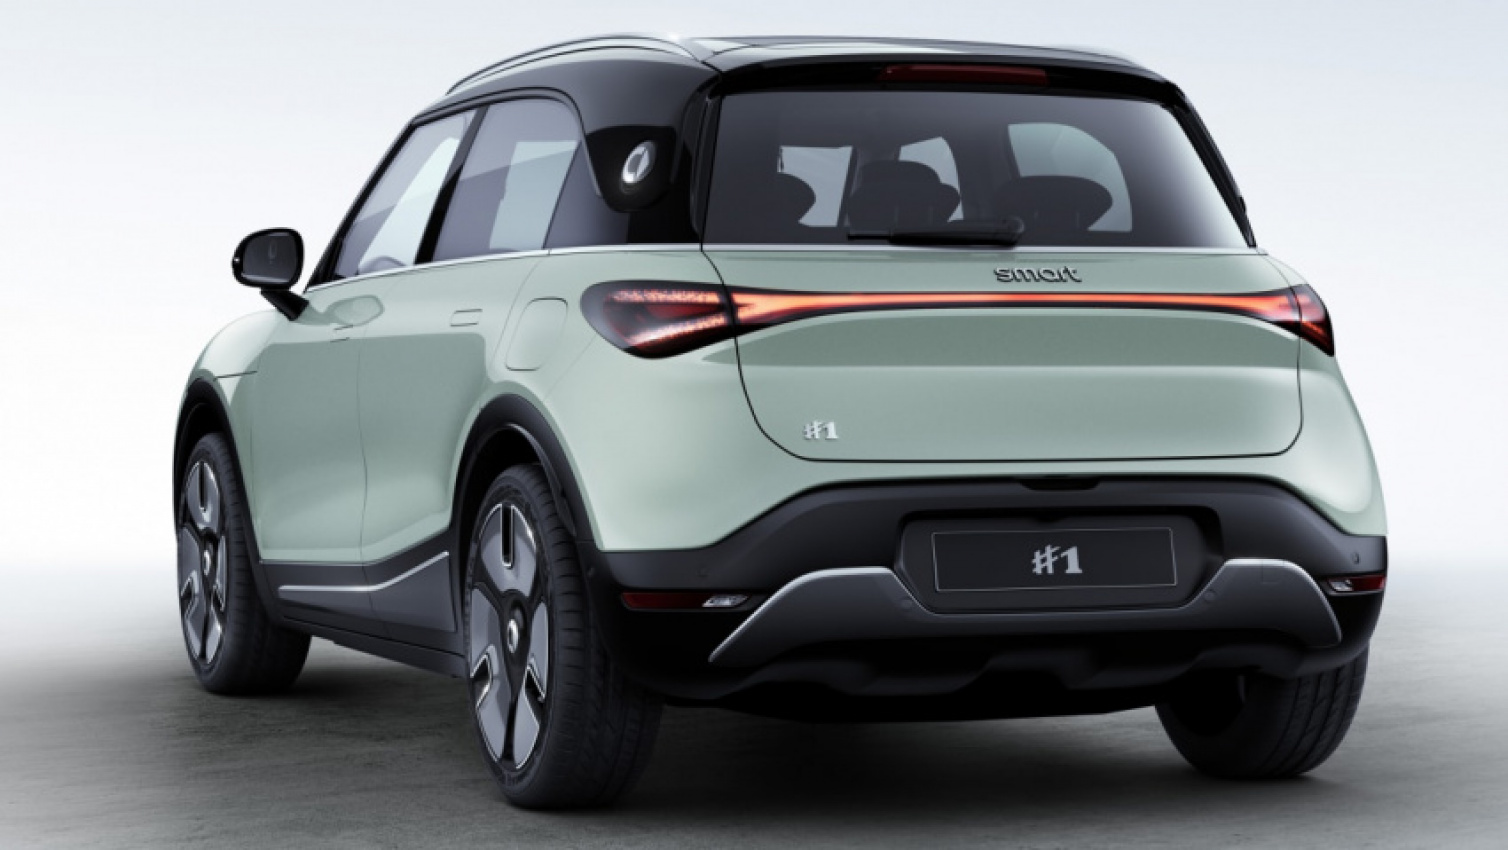 autos, cars, reviews, smart, electric cars, small suvs, vnex, the new smart #1 is the brand’s first suv